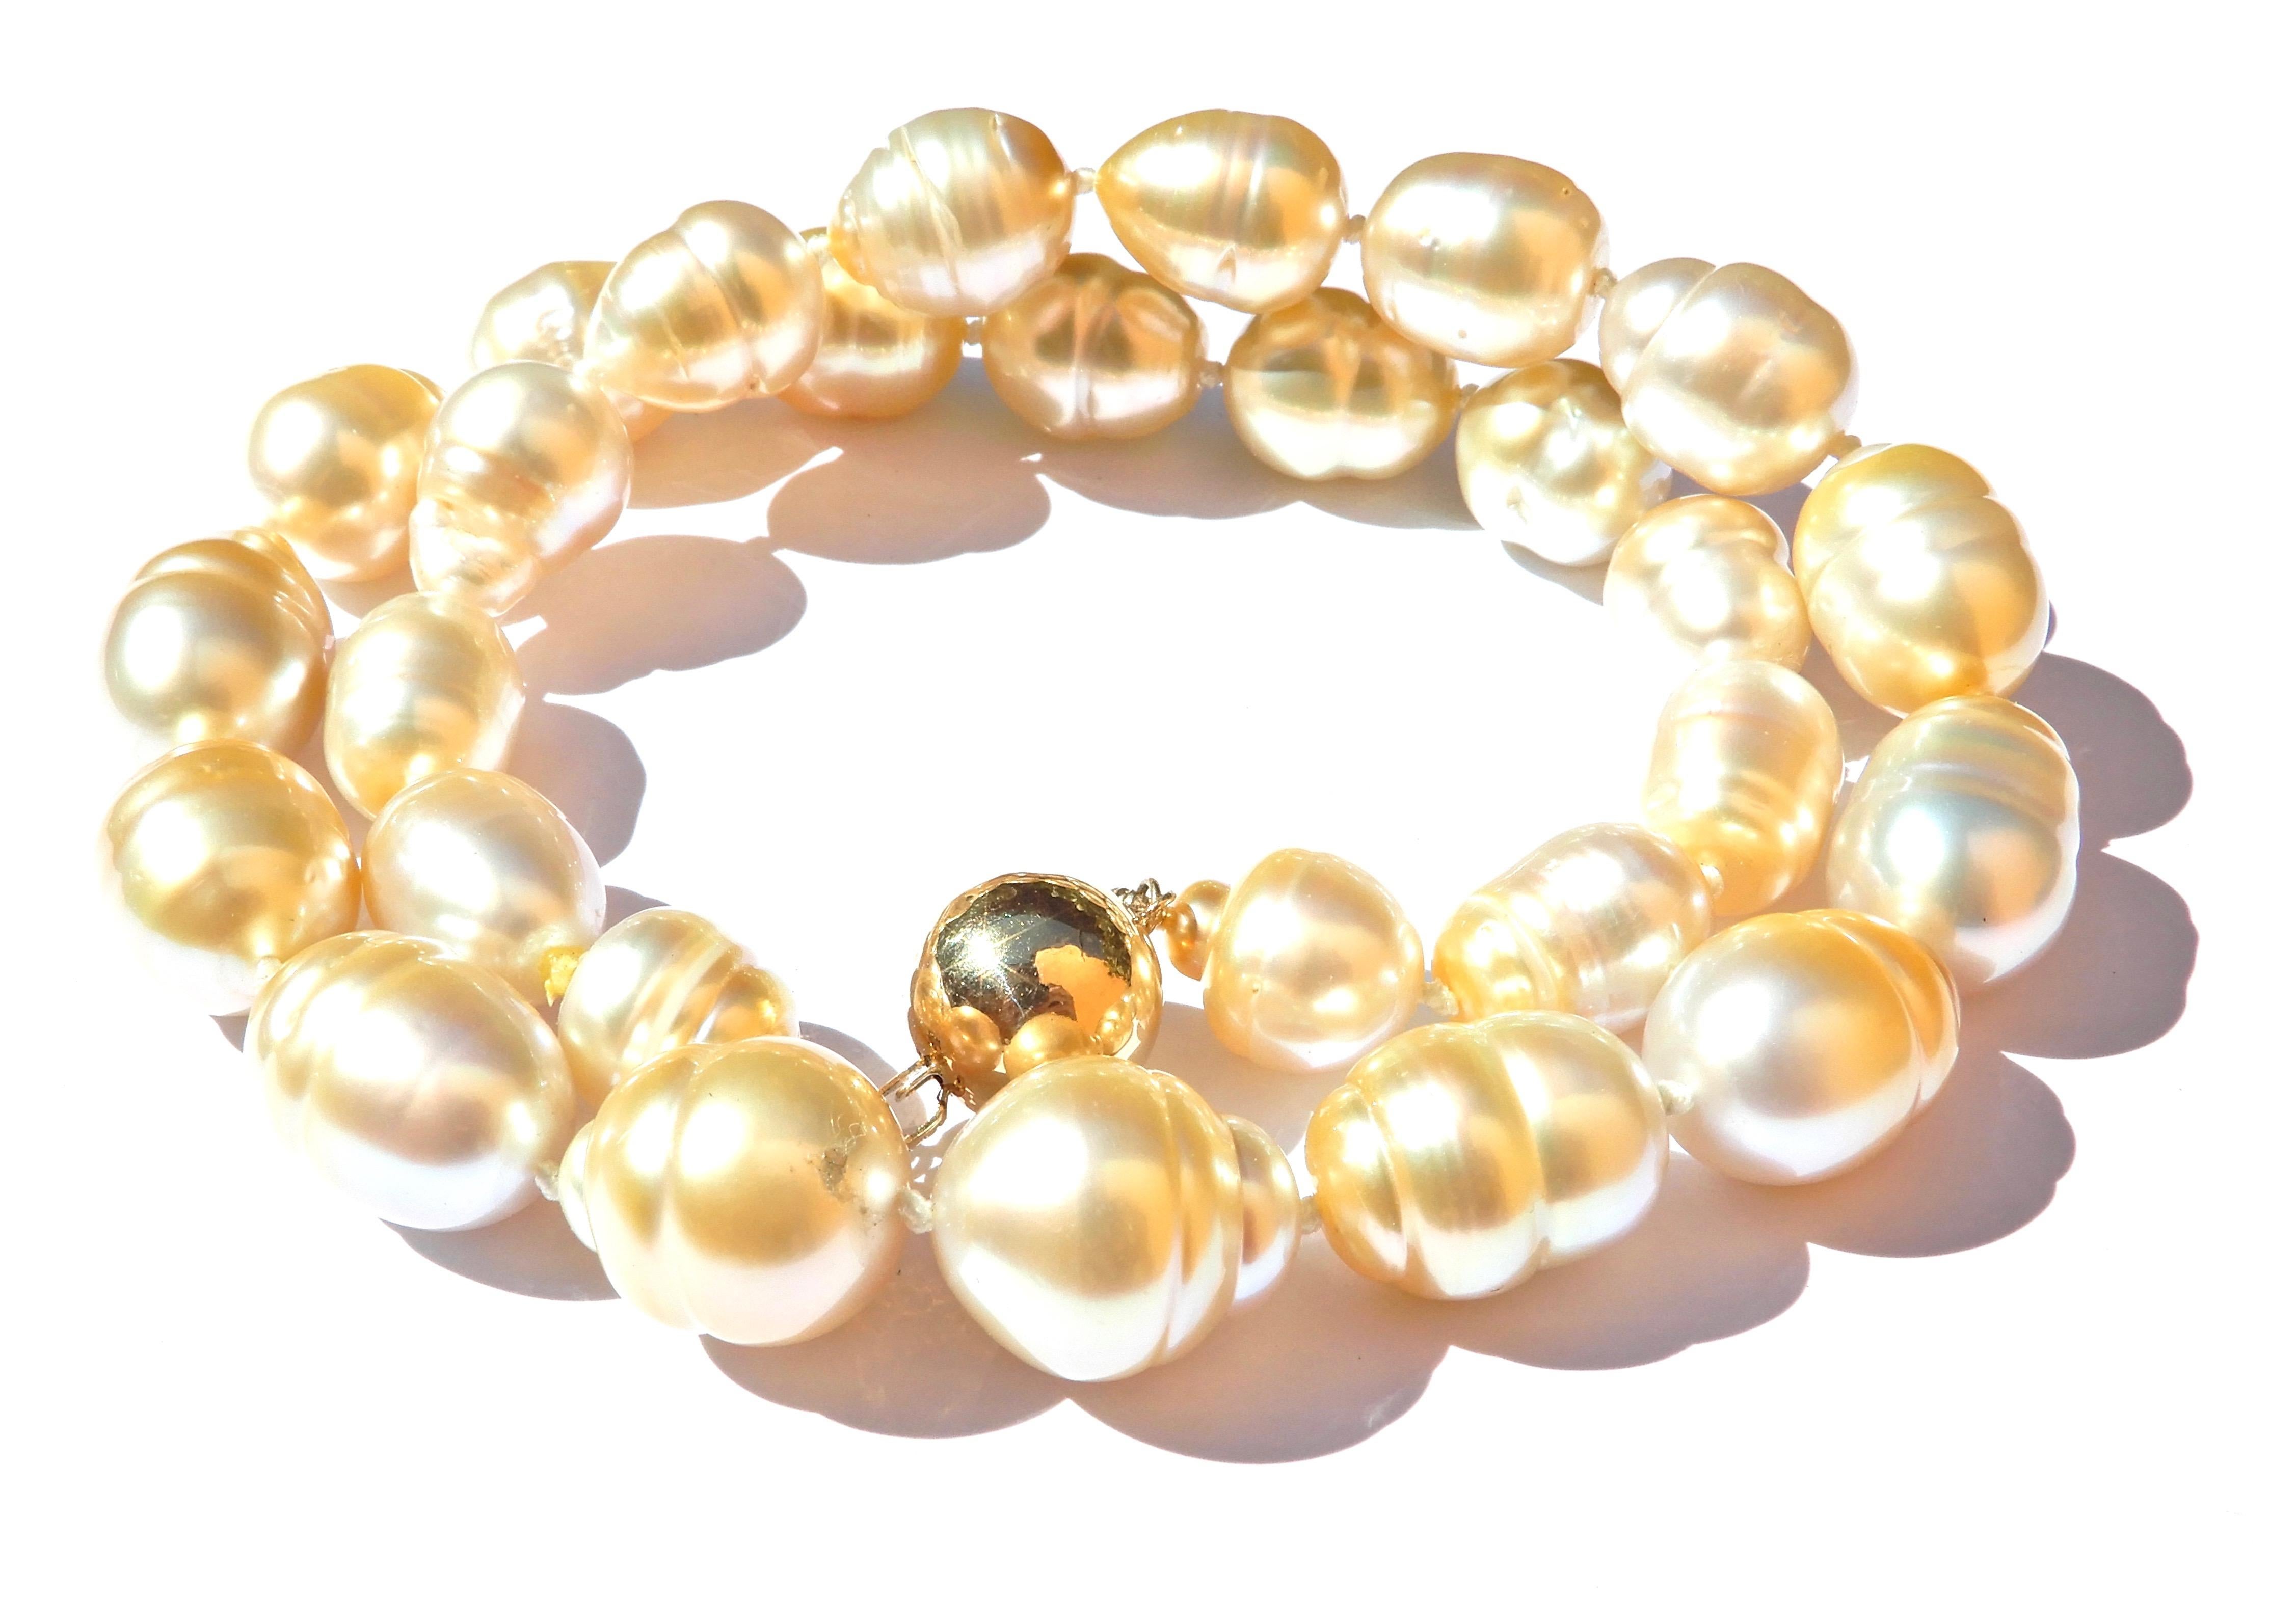 Golden and beautiful, this Graduated Golden South Sea Pearl and 9 Carat Yellow Gold Necklace is a show stopper. 

Gorgeous from every angle, this strand of 28 individually knotted, graduated golden south sea pearls measures 45cm in length. 

Fall in